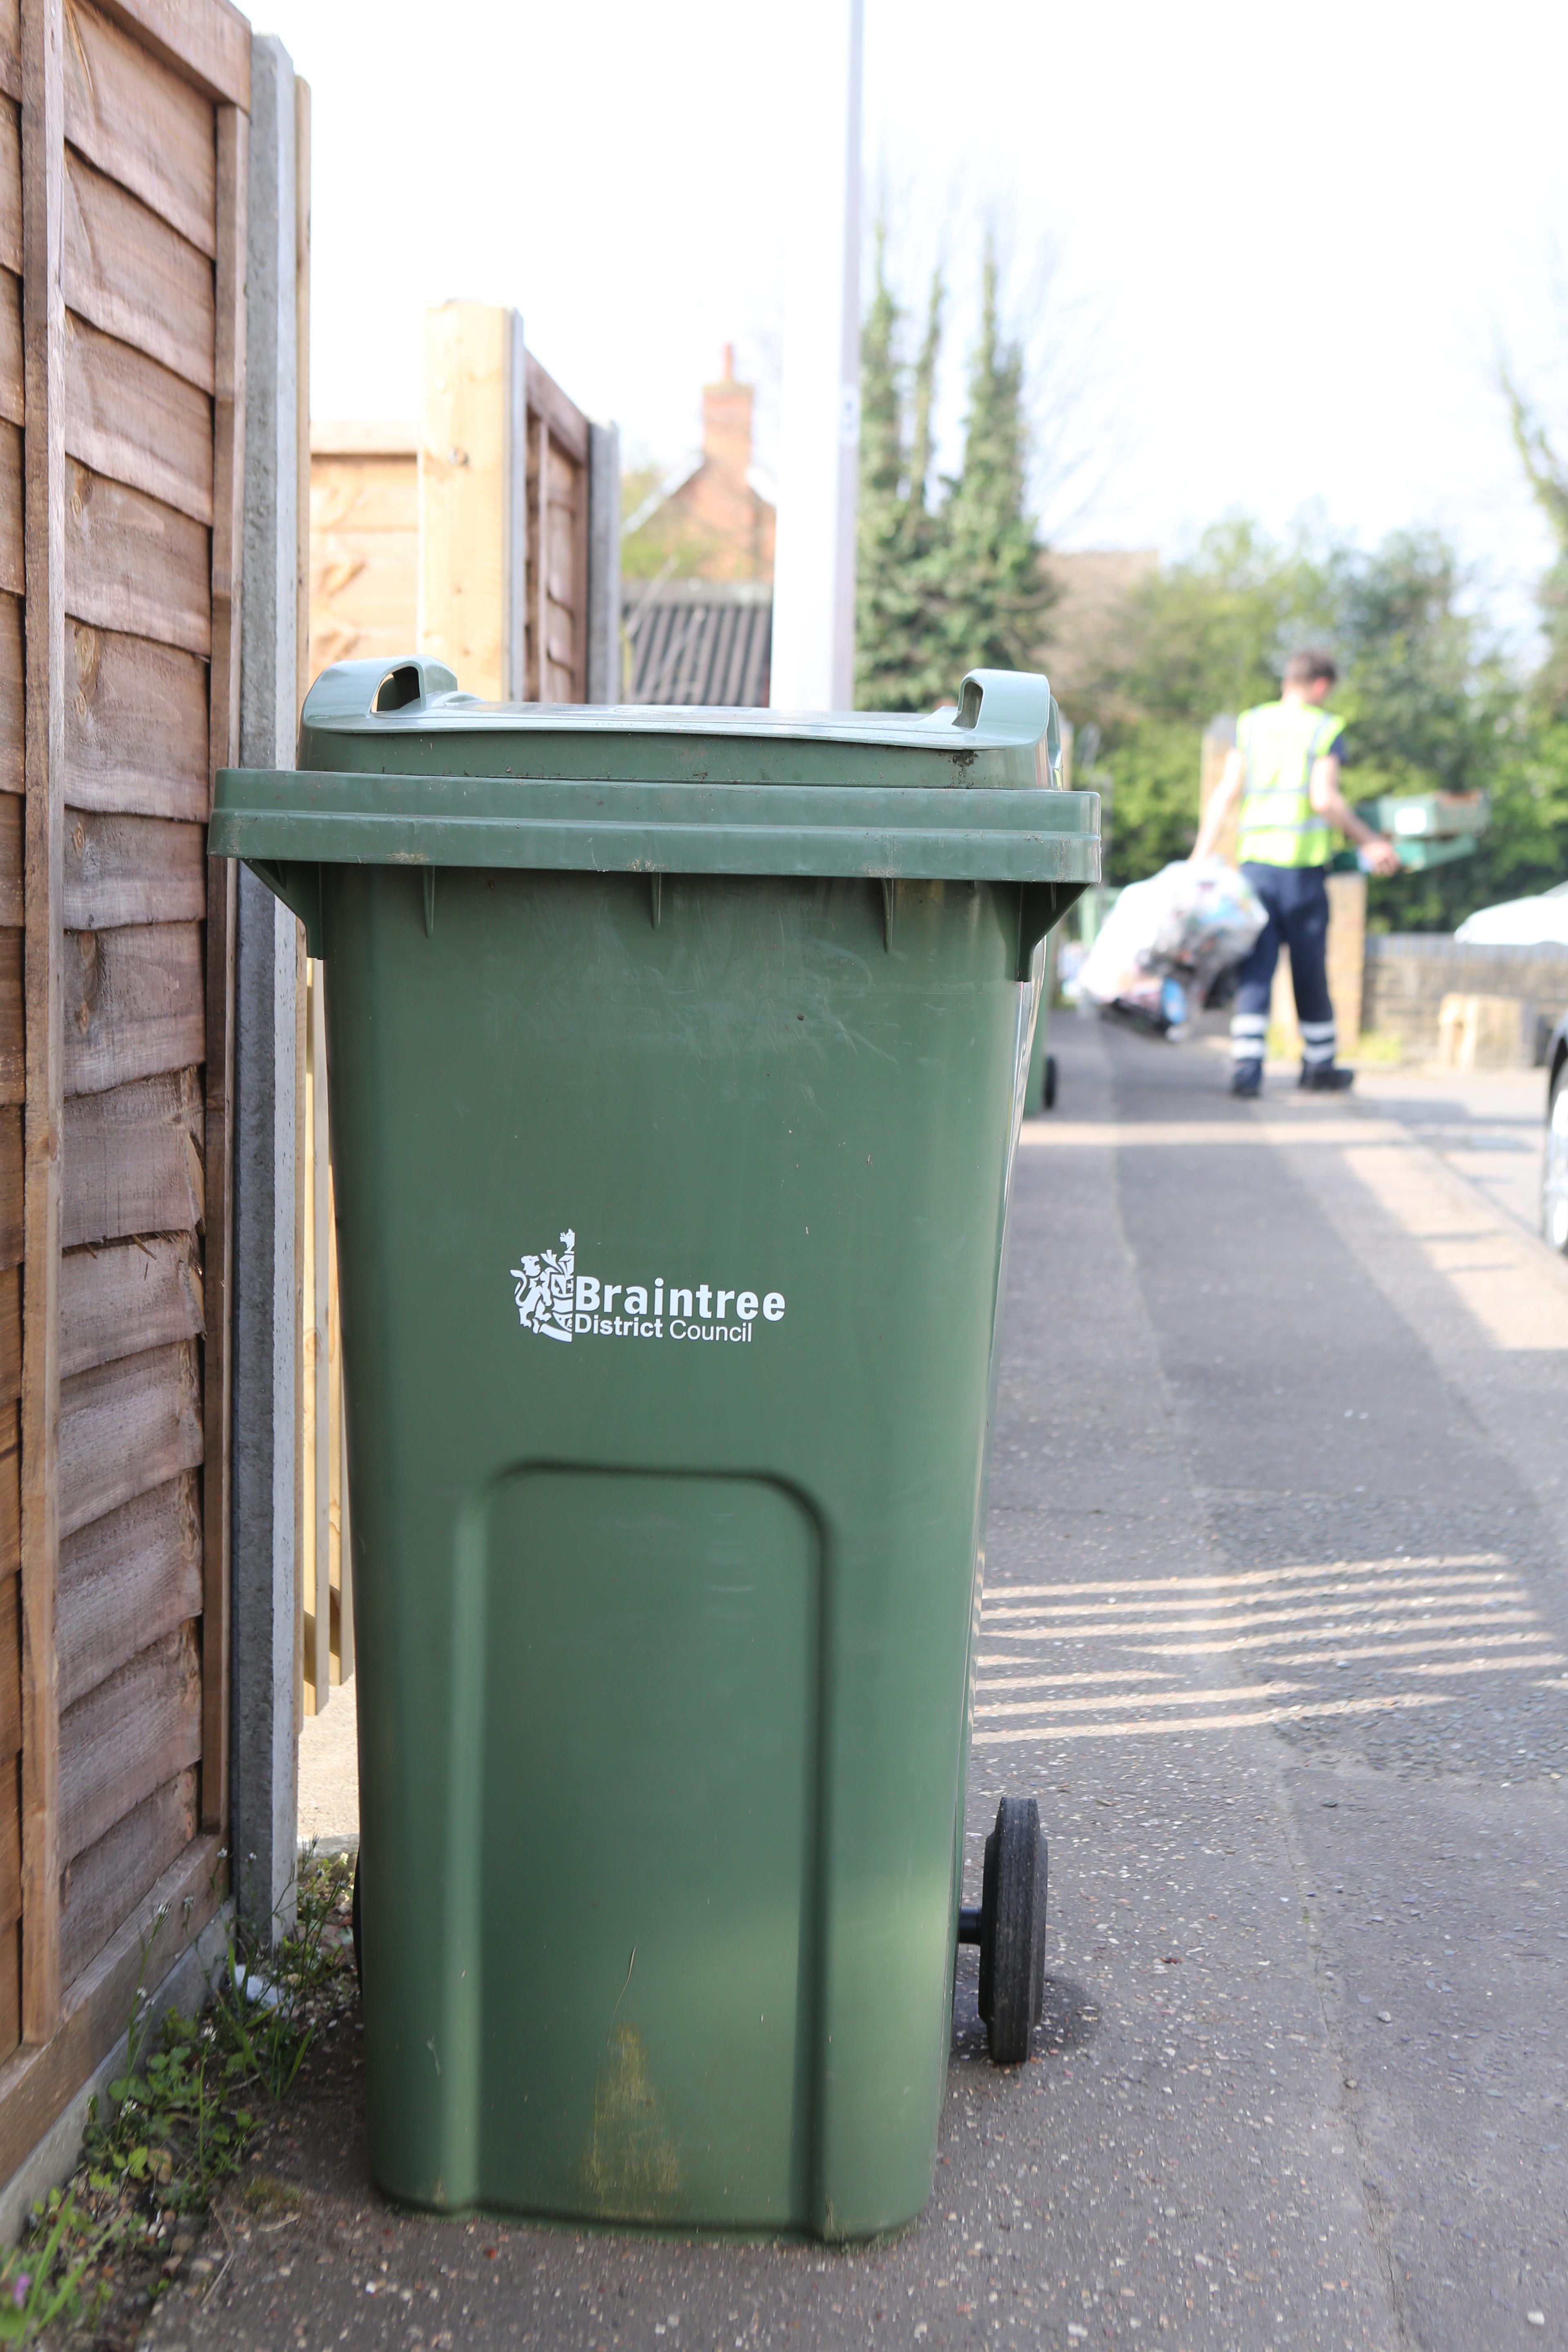 picture shows a Braintree District Council garden waste in ready for collection